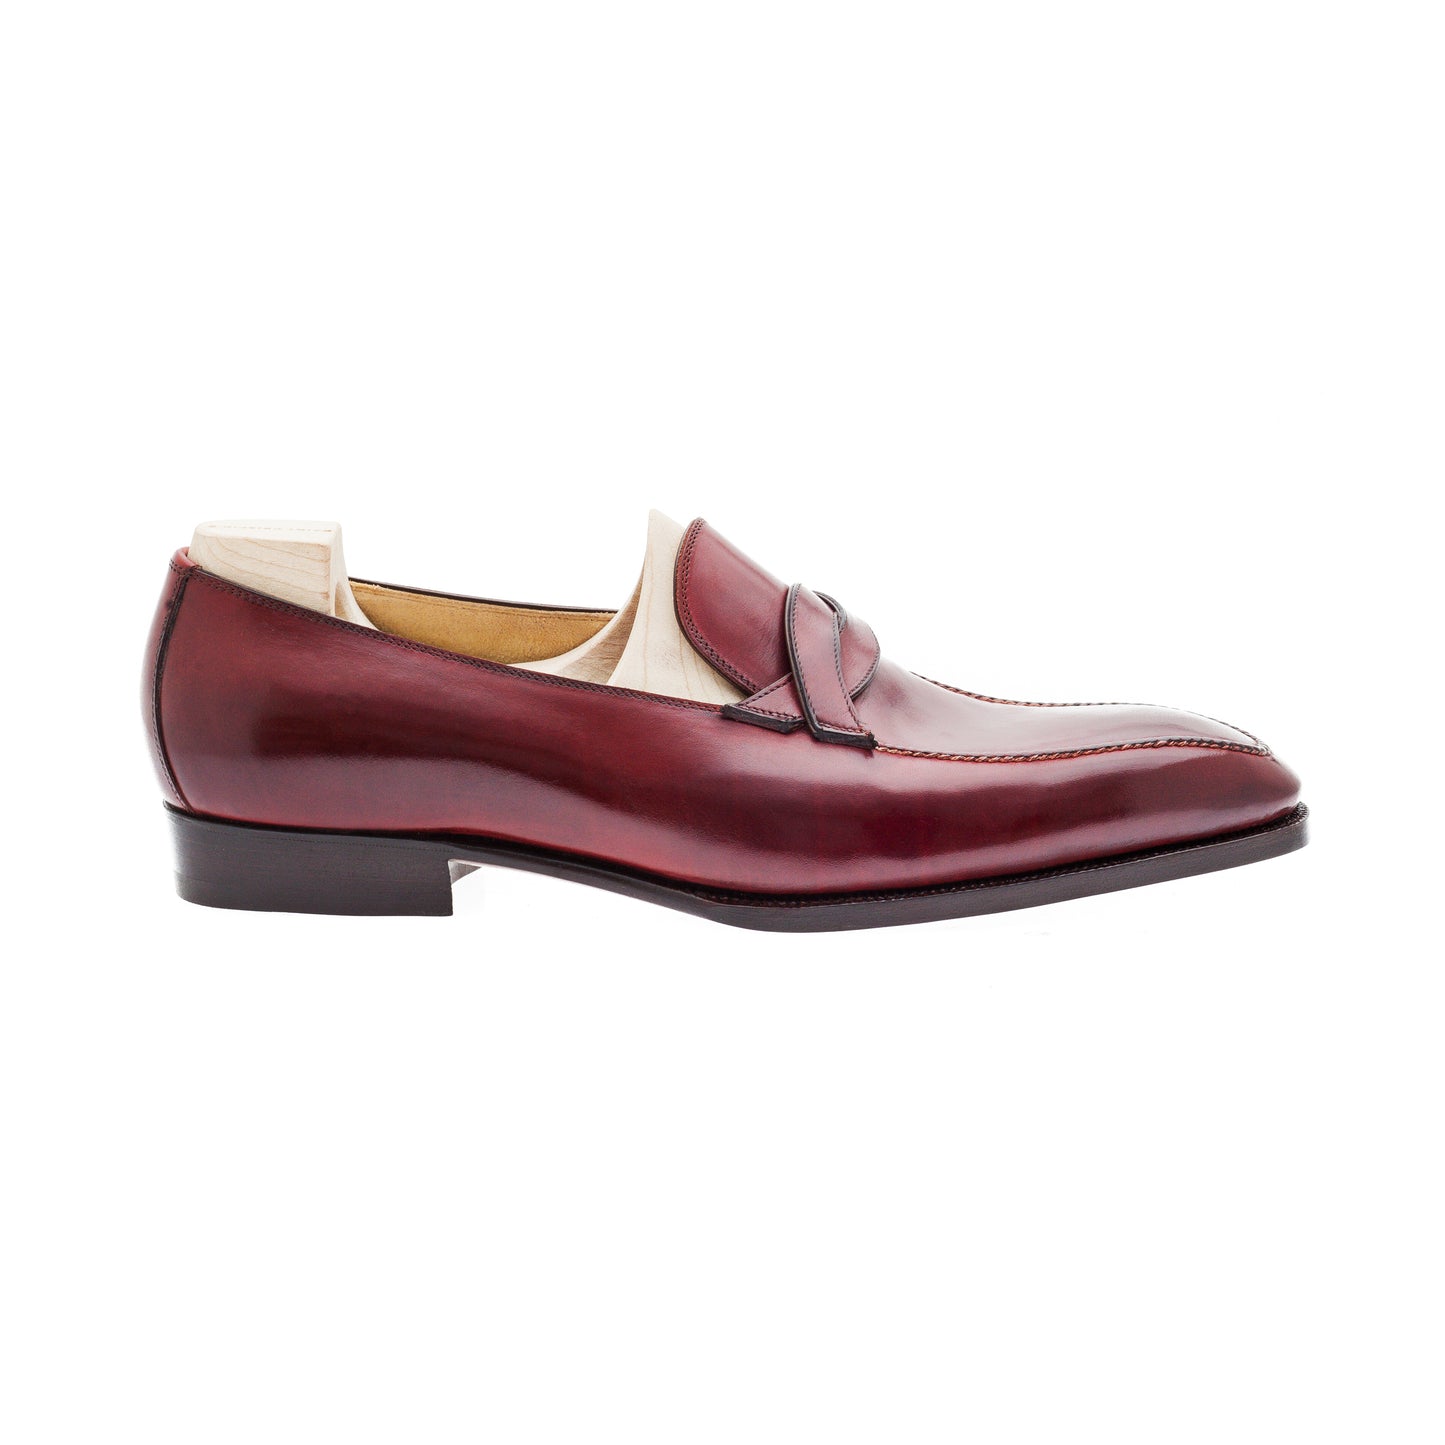 Entwinded loafer in Burgundy Crust calf leather